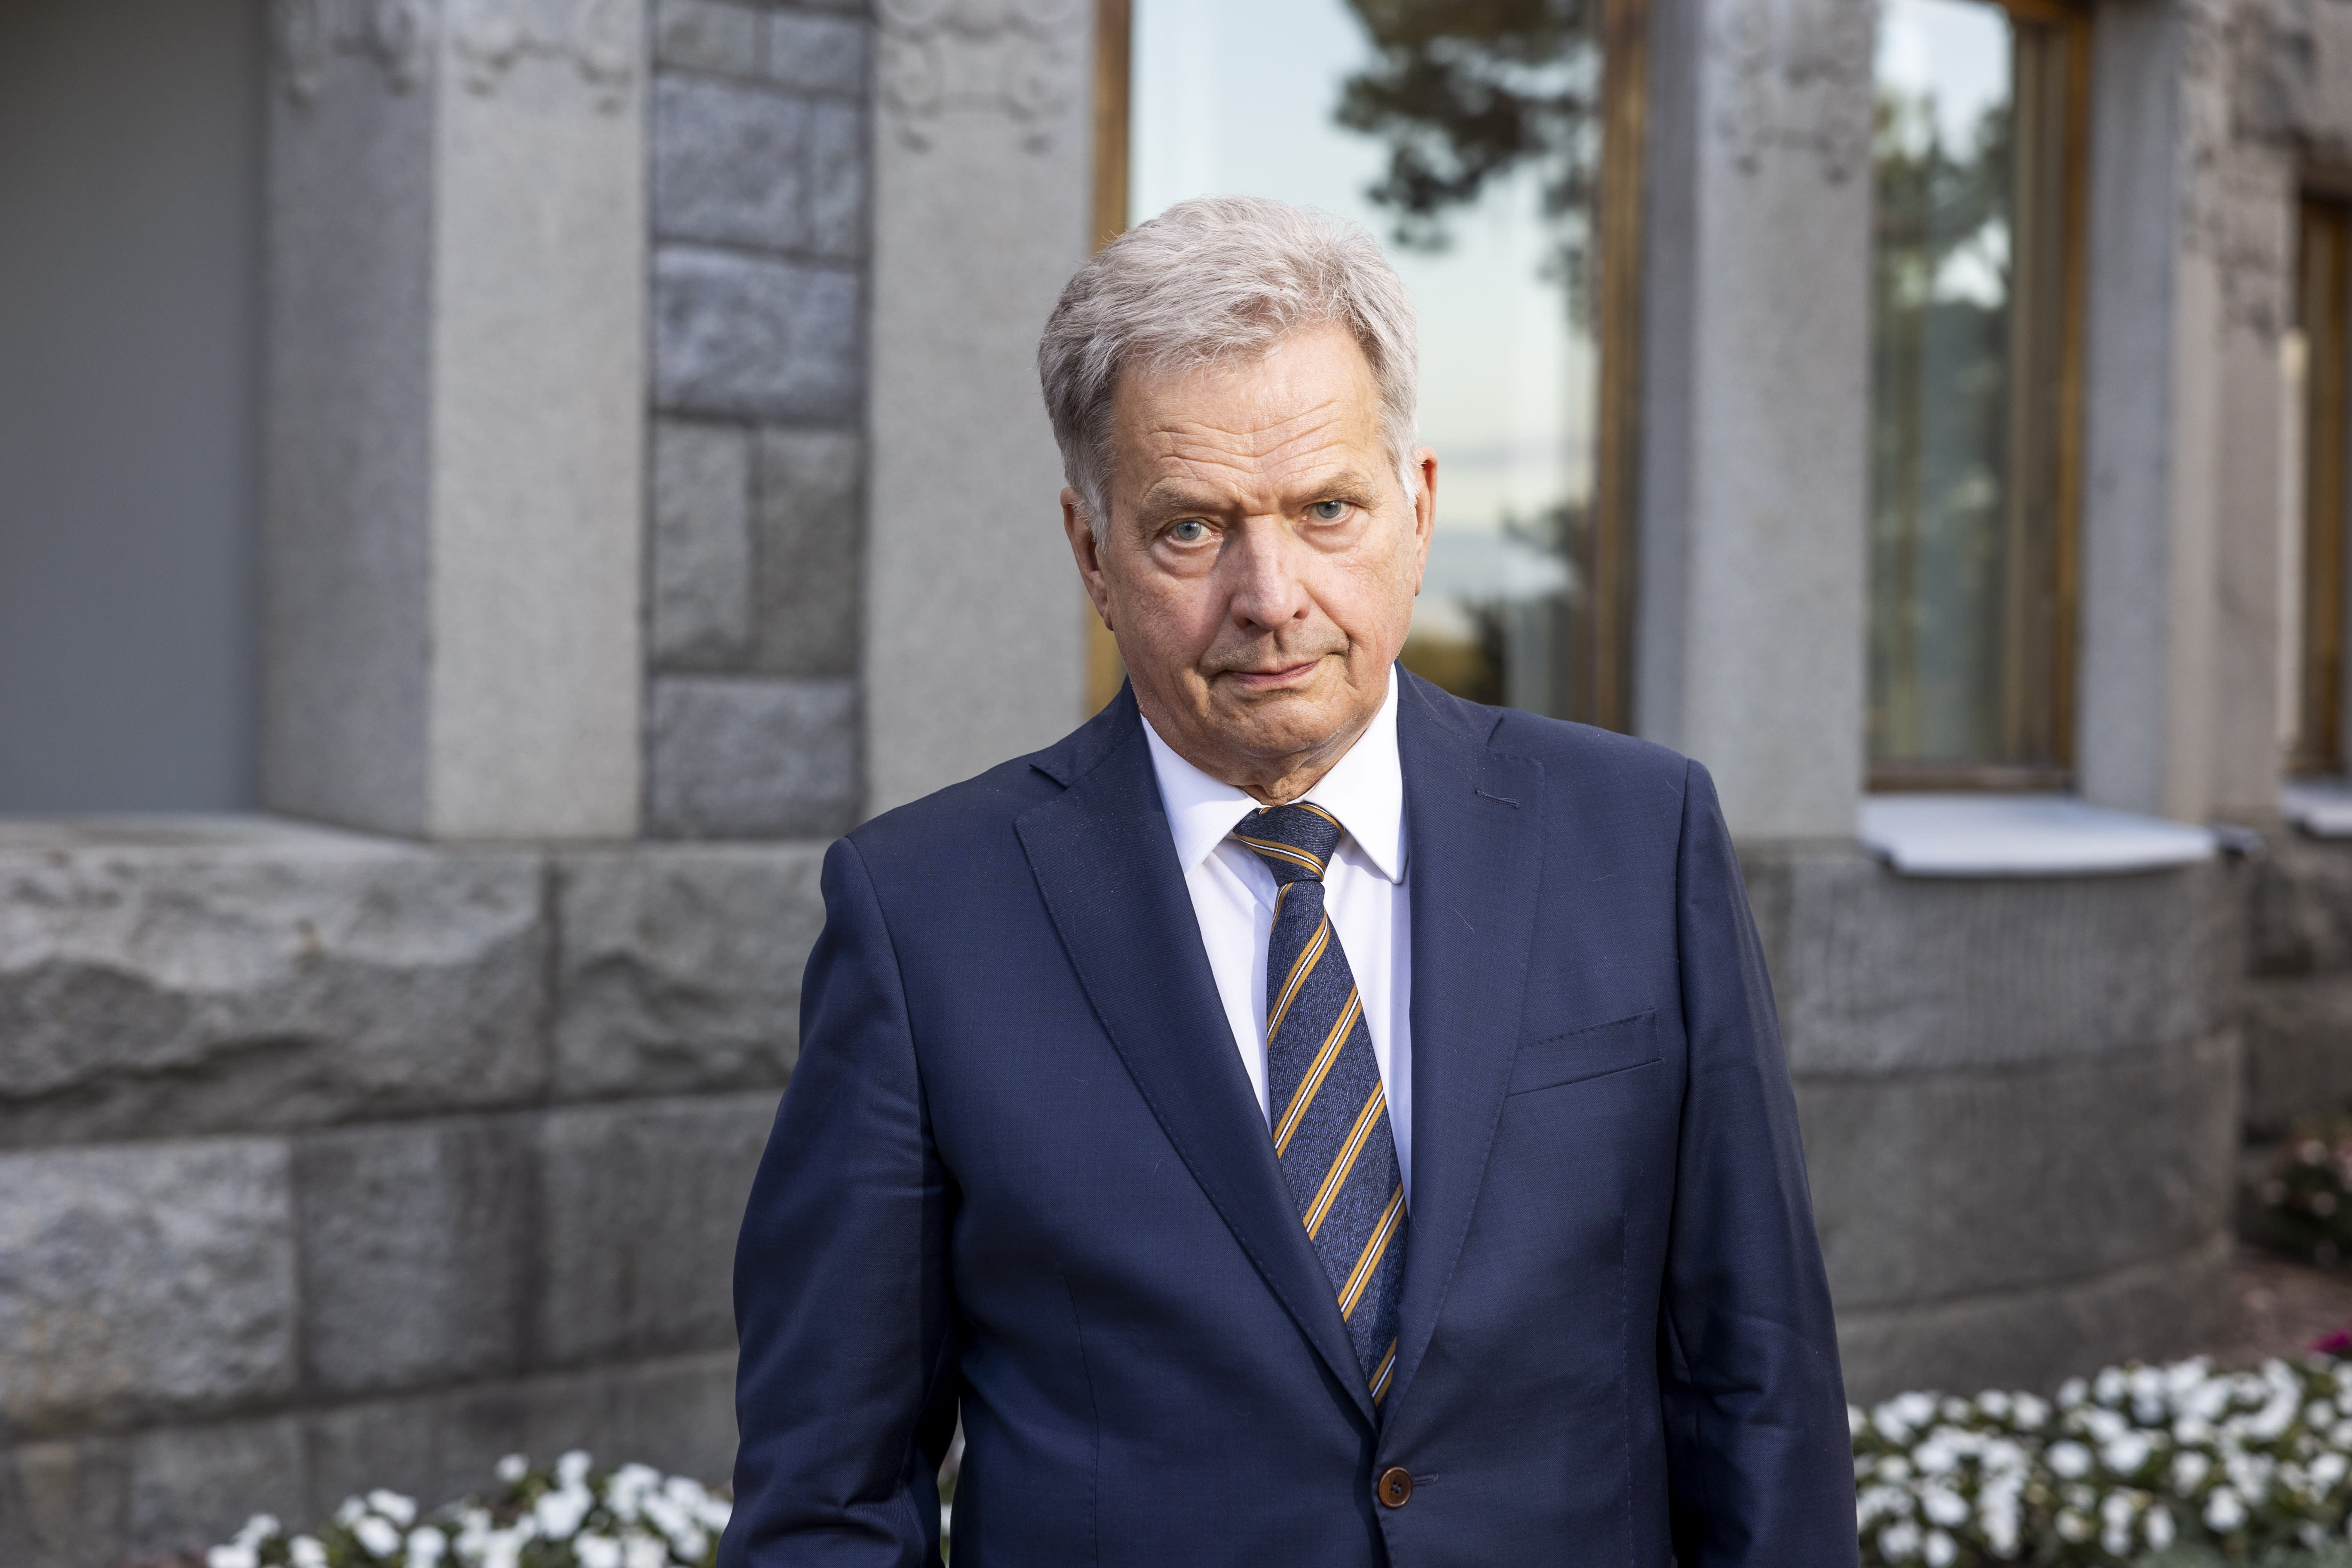 IS: President Niinistö is concerned about the corona situation in Finland